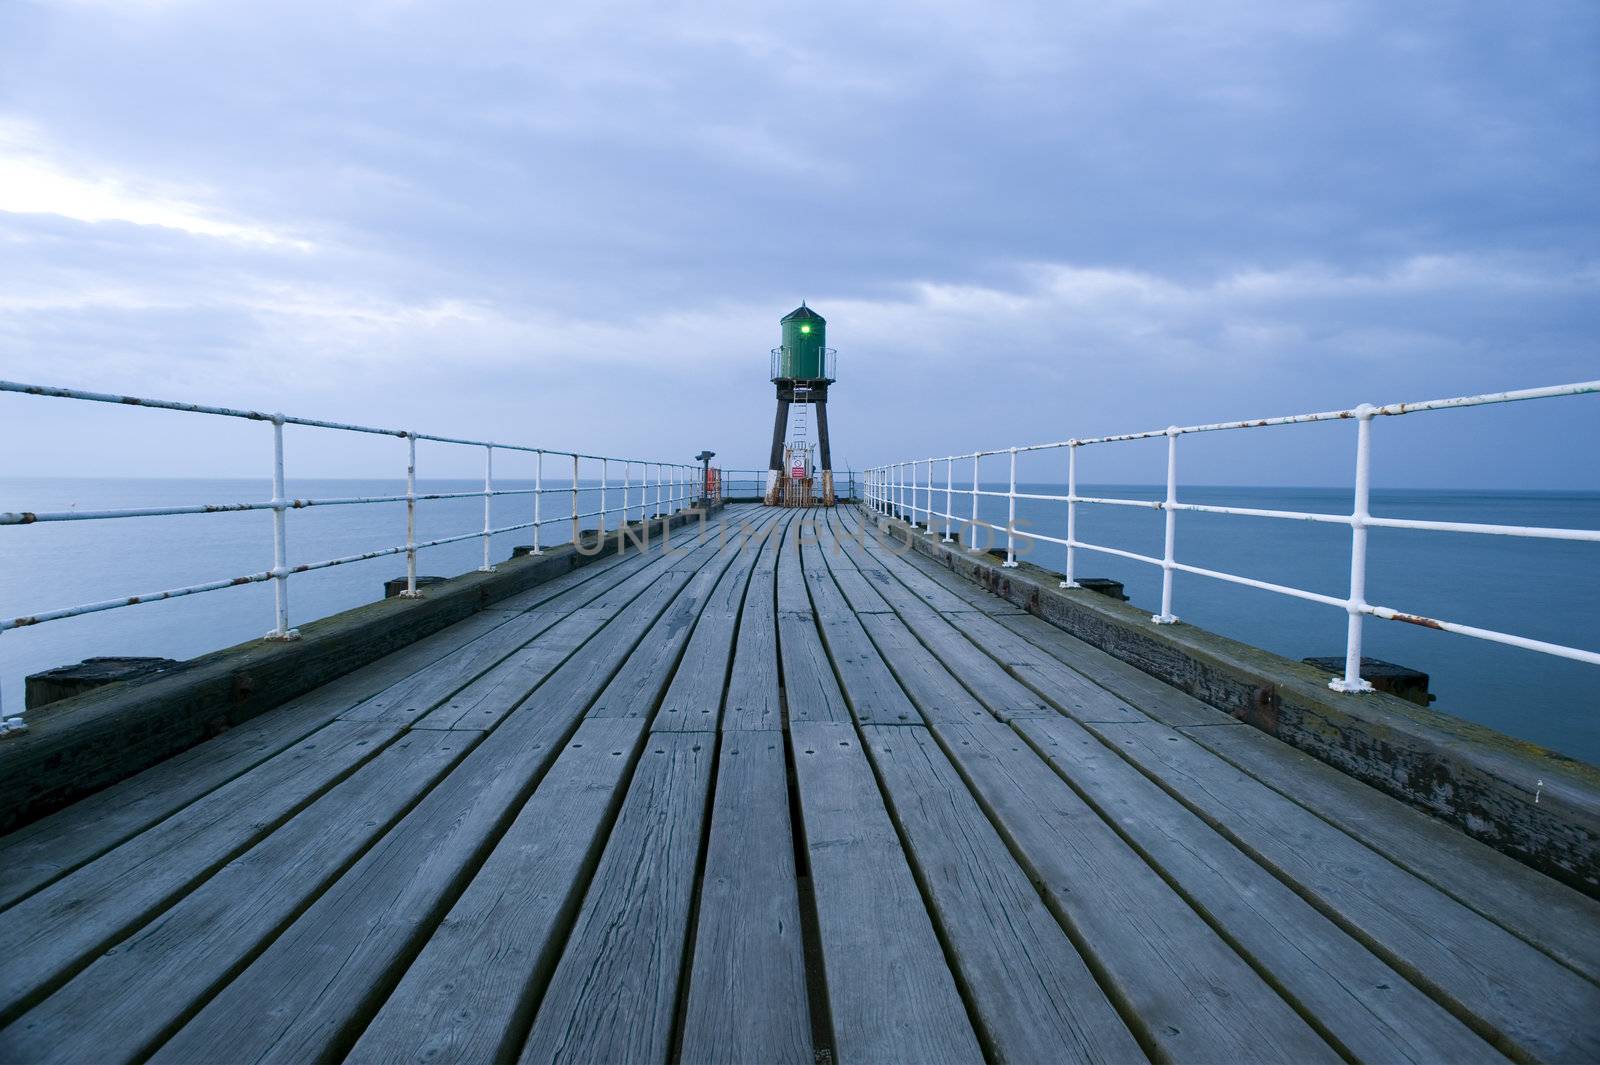 View along the deserted wooden planking forming the promenade on top of the pier or breakwater at the harbour entrance in Whitby to the navigation beacon at the end